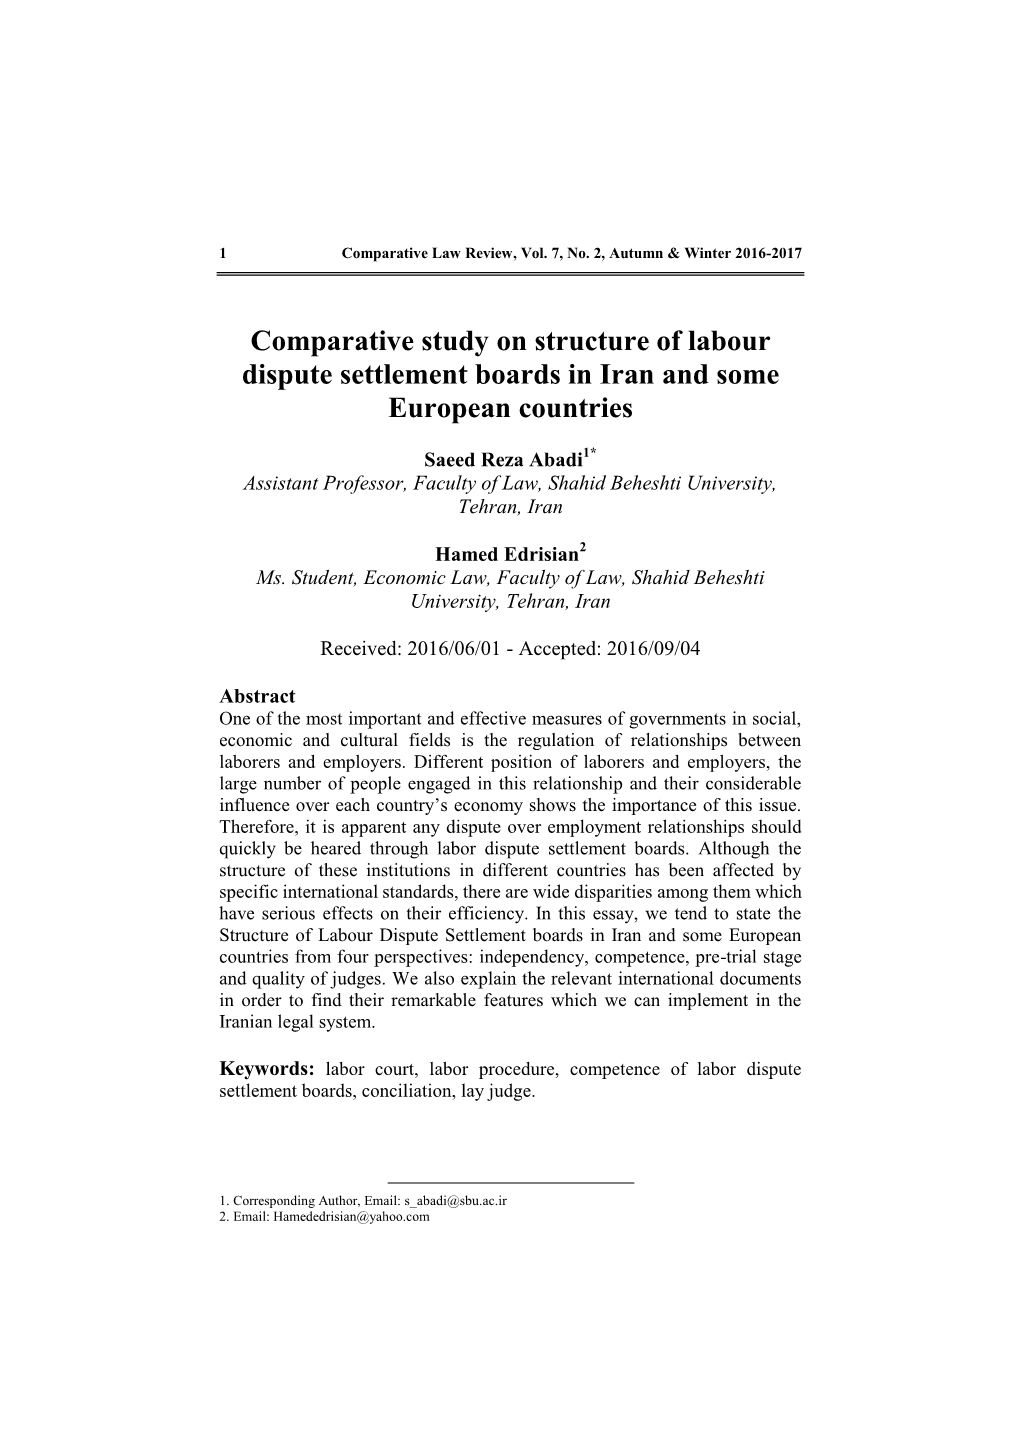 Comparative Study on Structure of Labour Dispute Settlement Boards in Iran and Some European Countries